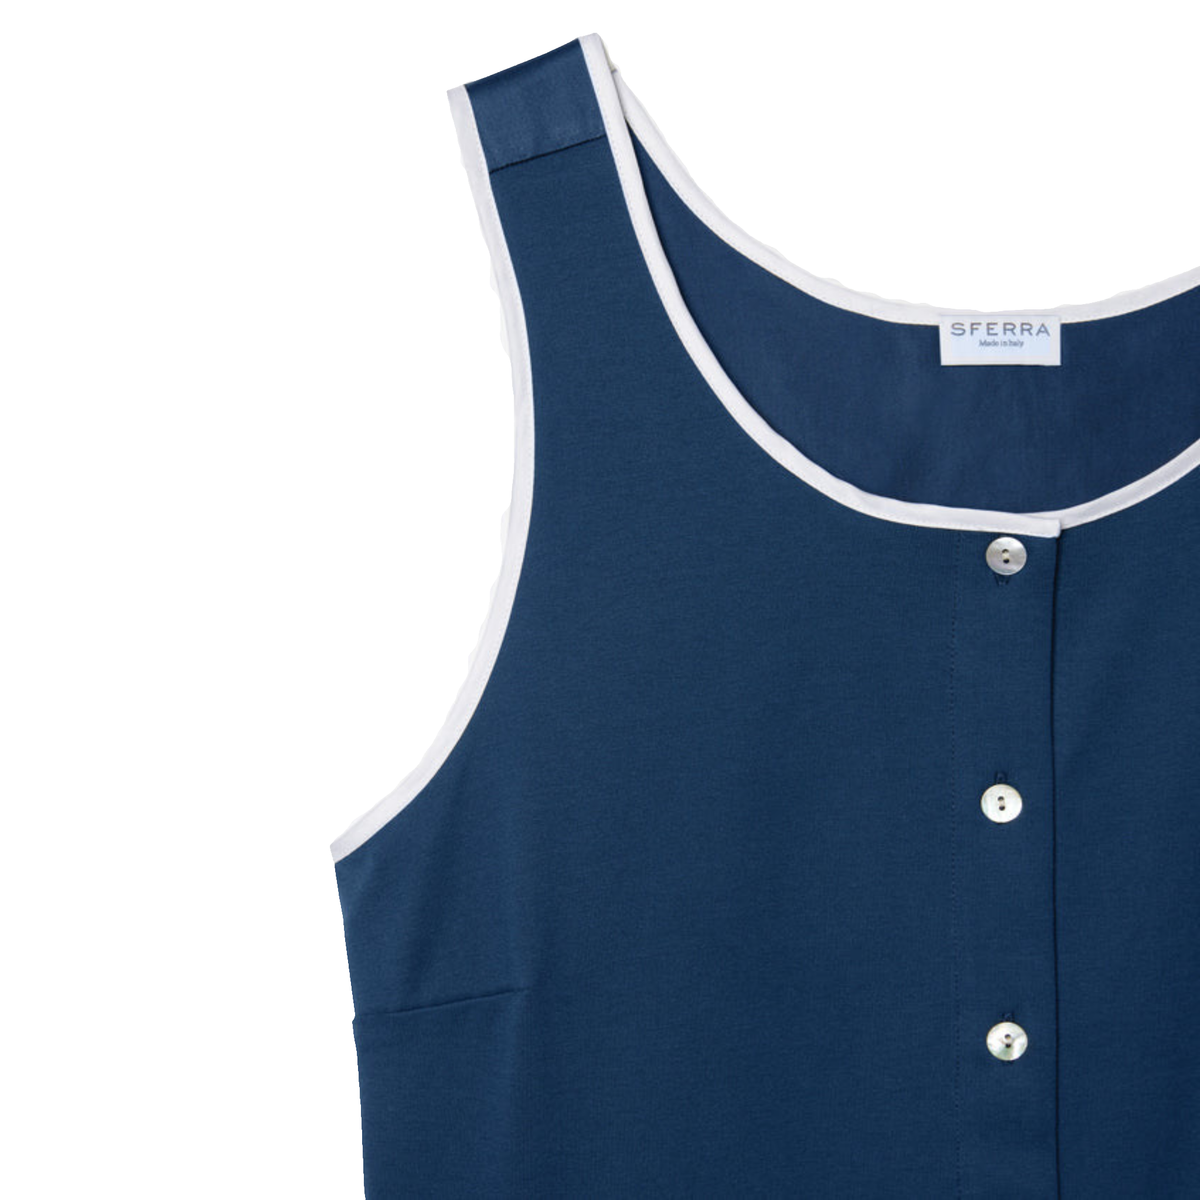 Corner View of Navy Sferra Caricia Buttoned Tank Top against a white background